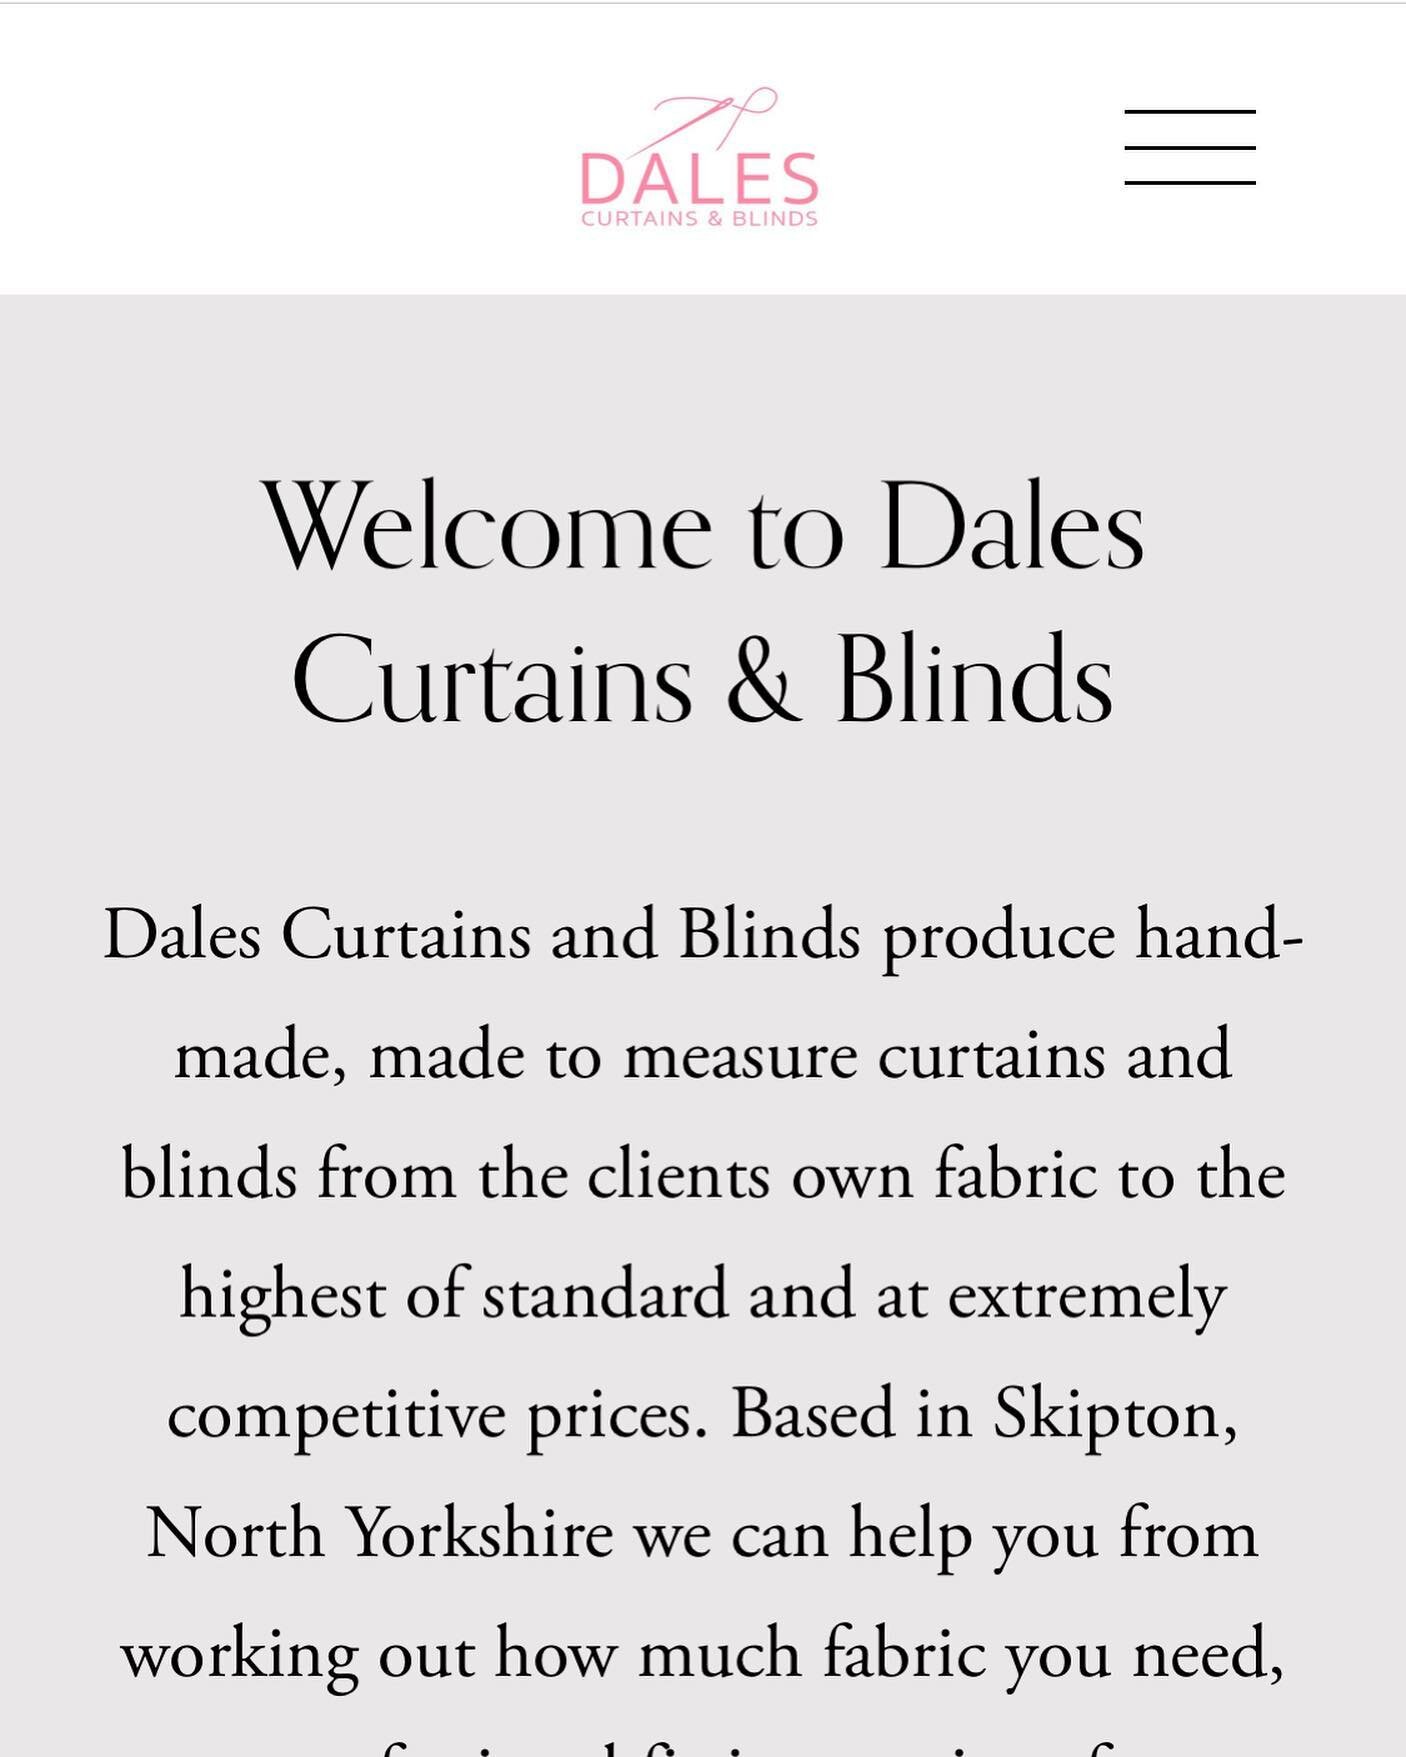 We have a new website! Check it out! #curtainmaker #bespokecurtains #madetomeasurecurtainsandblinds #handmadecurtains #bespokeblinds #madetomeasureblinds #sticher #softfurnishings #bespokefurnishings #skipton #ilkley #northyorkshire #curtains #romanb